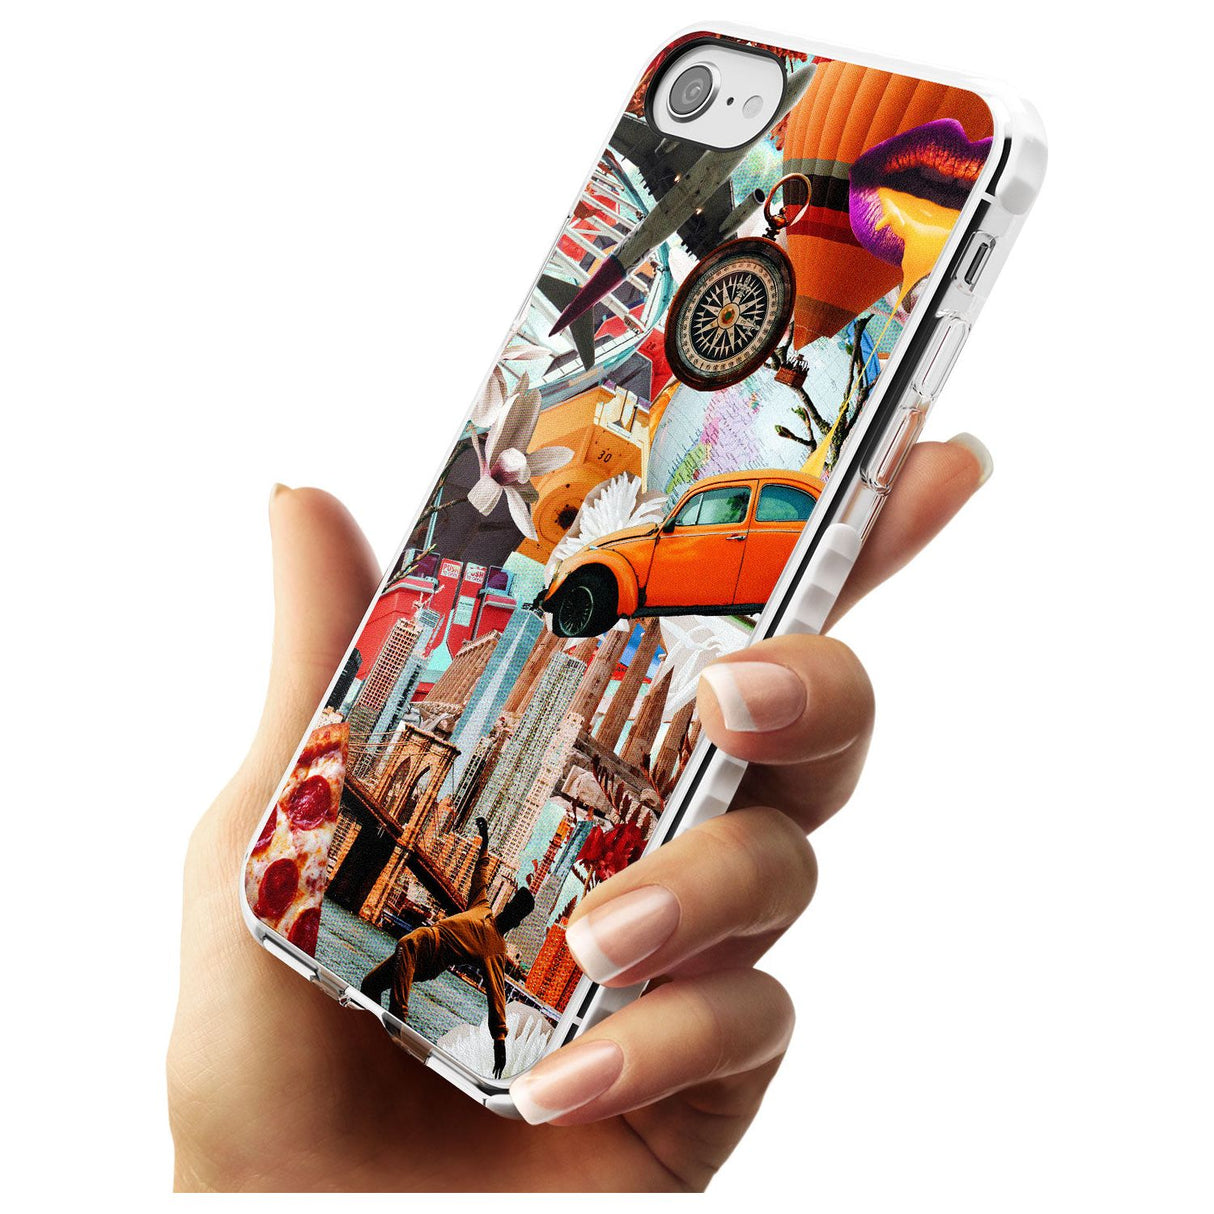 Vintage Collage: New York Mix Impact Phone Case for iPhone SE 8 7 Plus